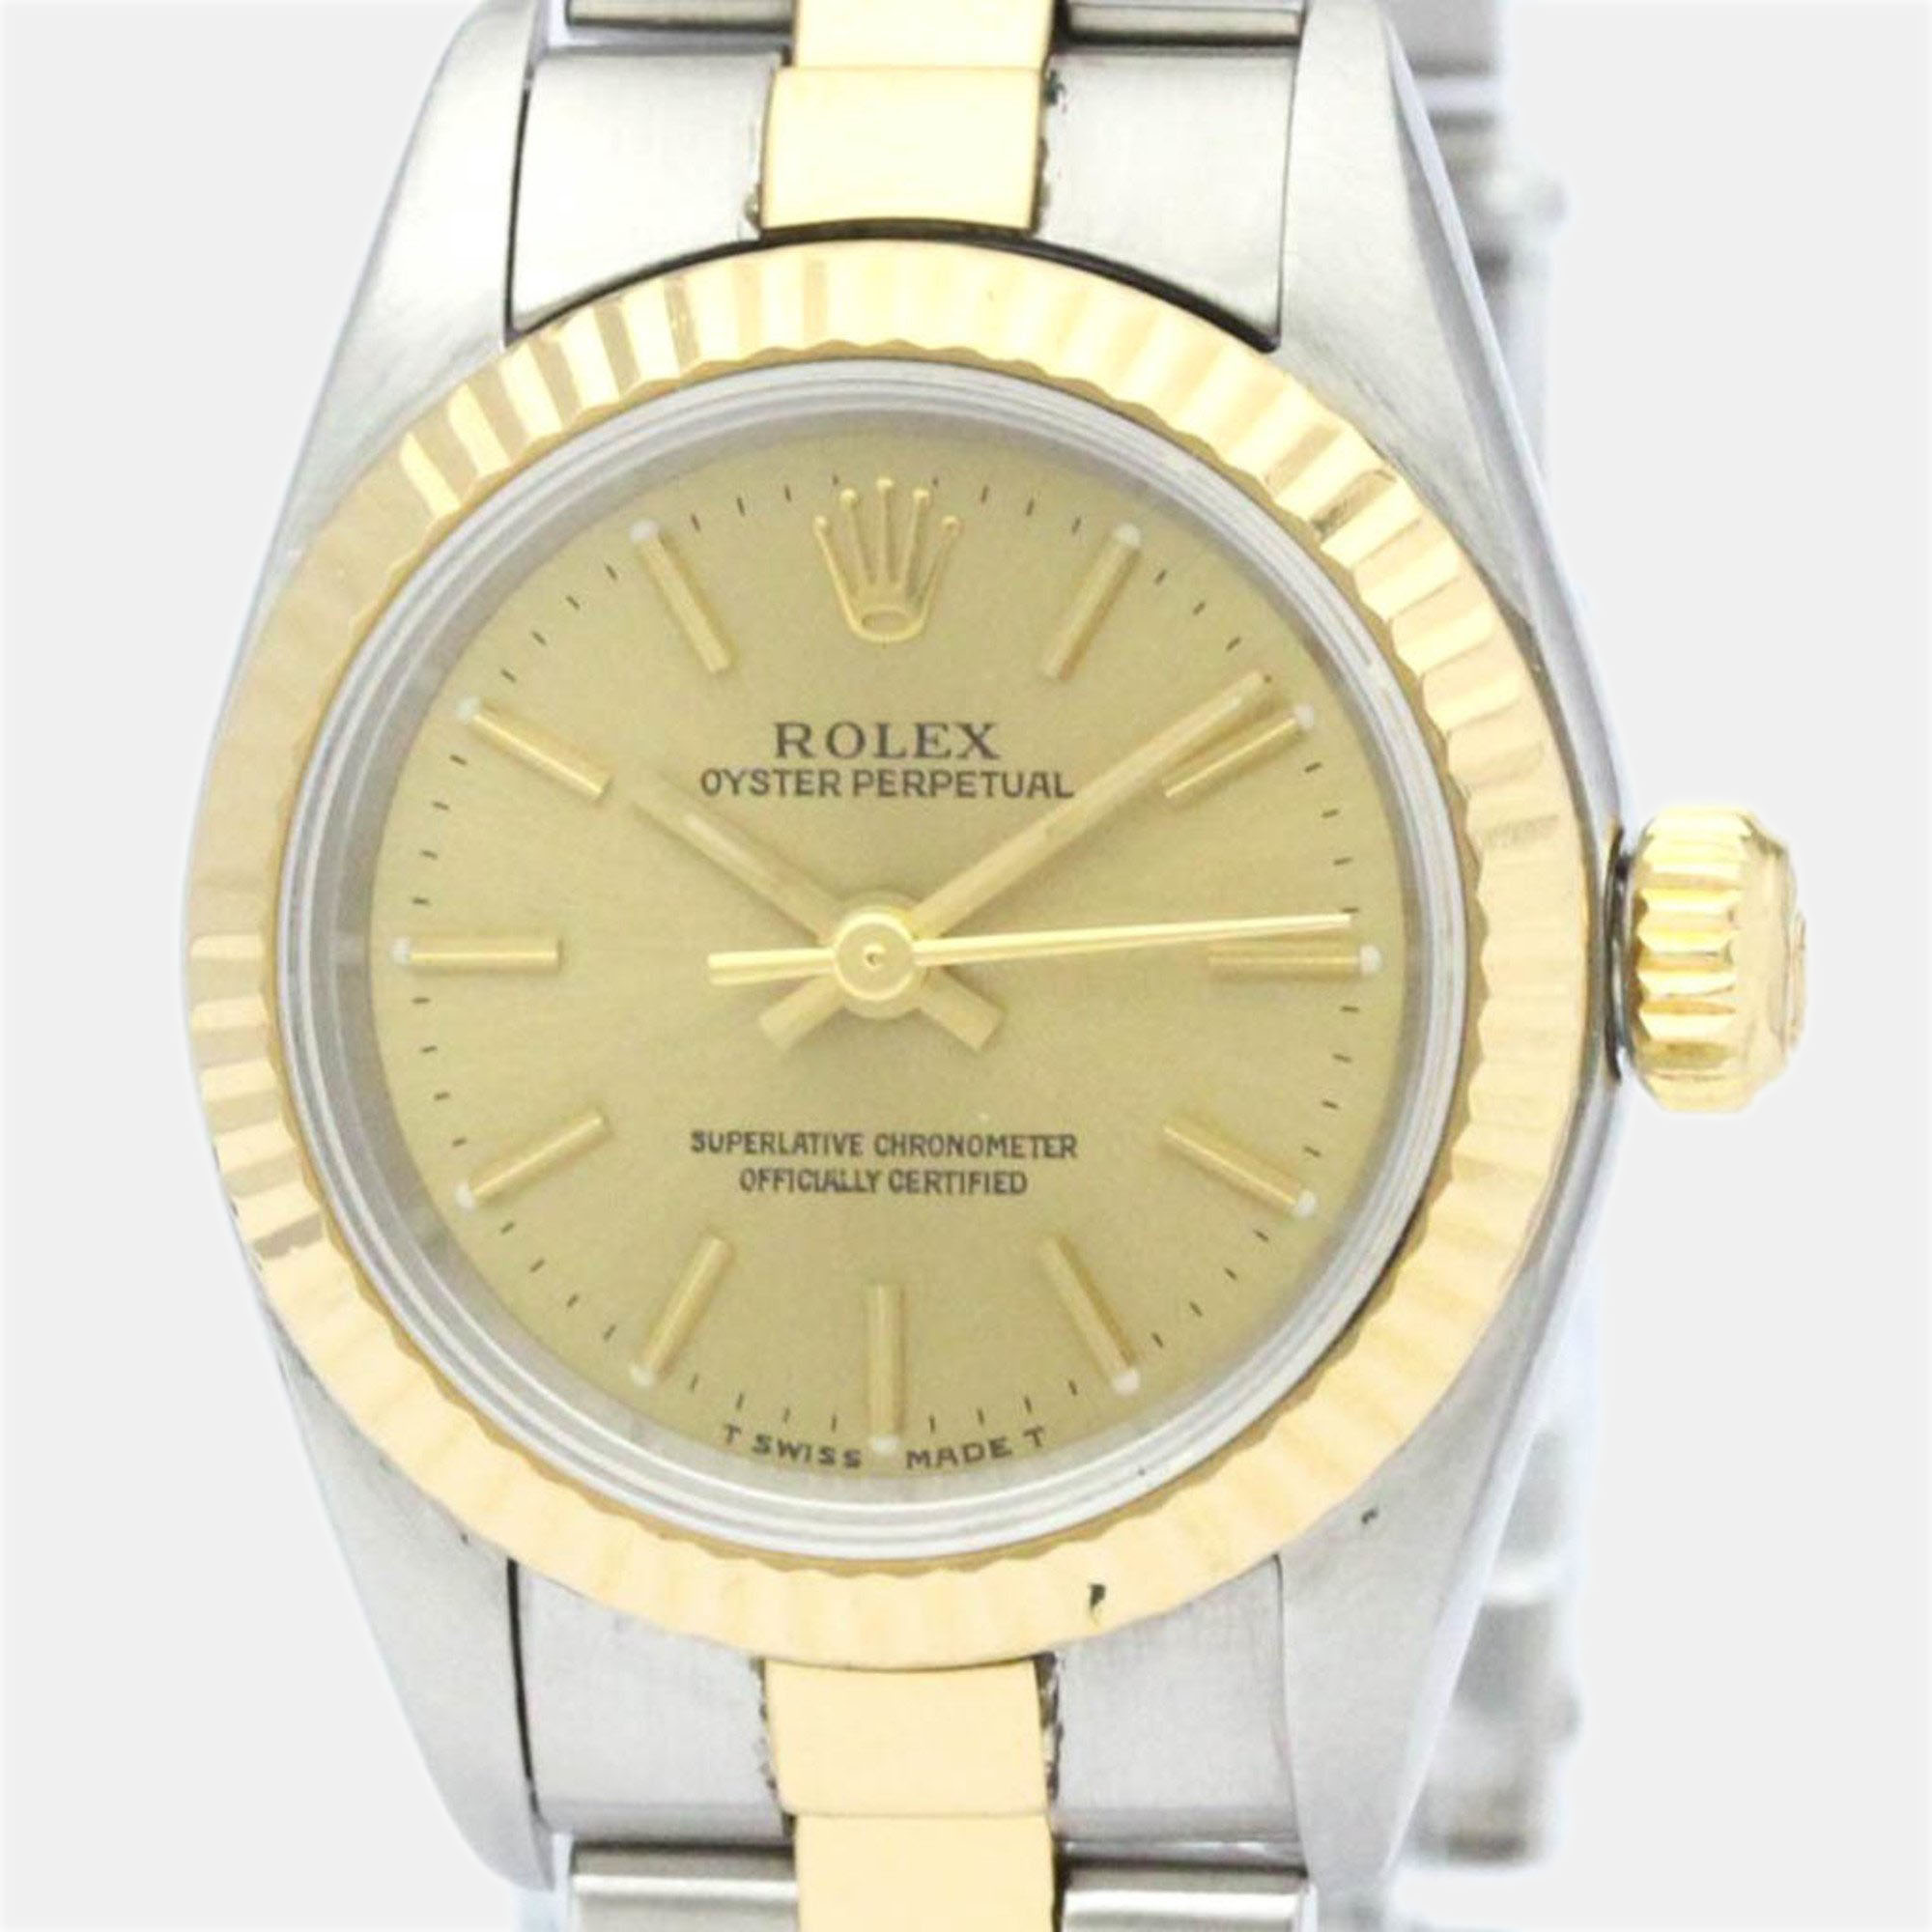 Rolex champagne 18k yellow gold and stainless steel oyster perpetual 67193 automatic women's wristwatch 24 mm